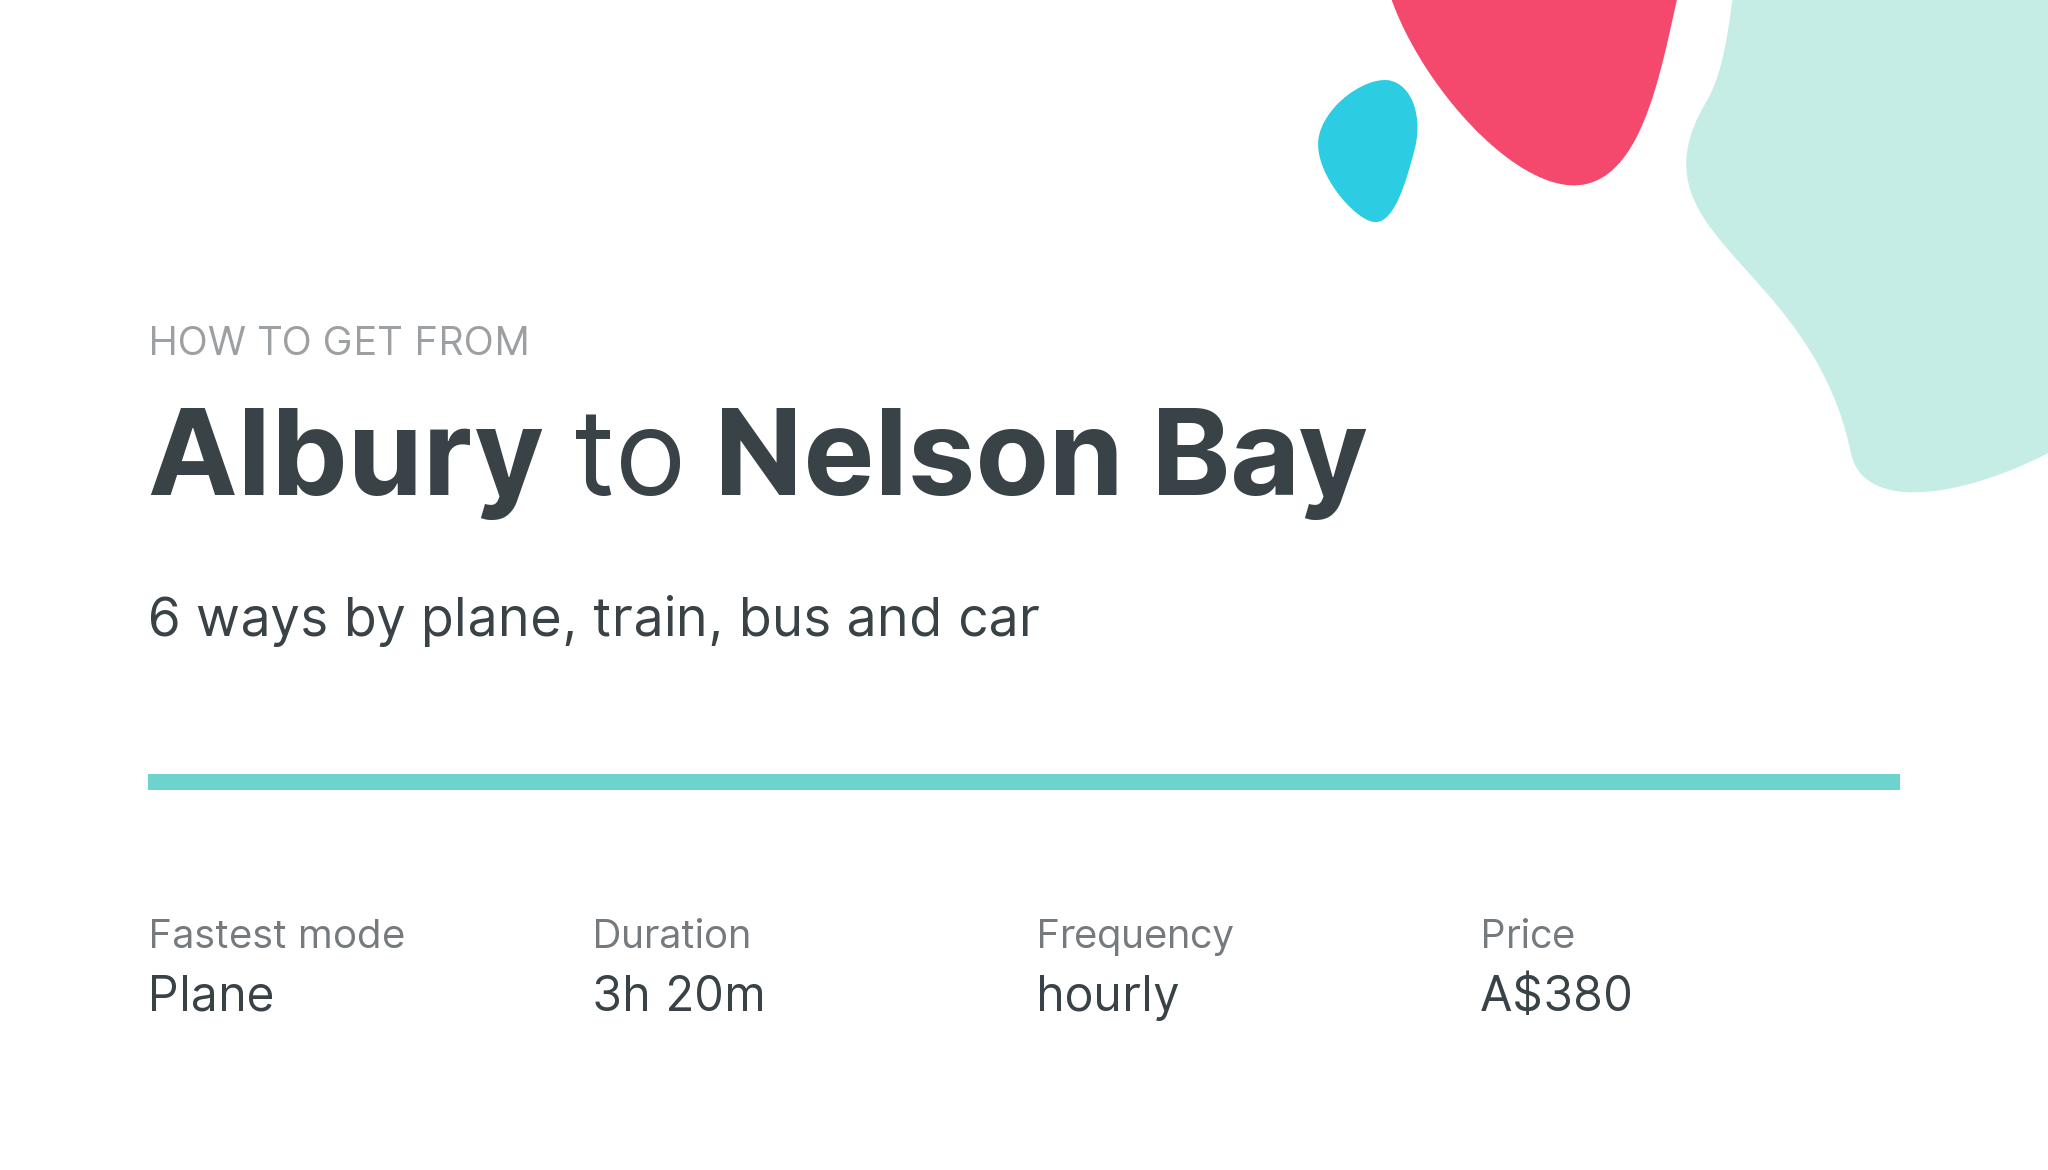 How do I get from Albury to Nelson Bay